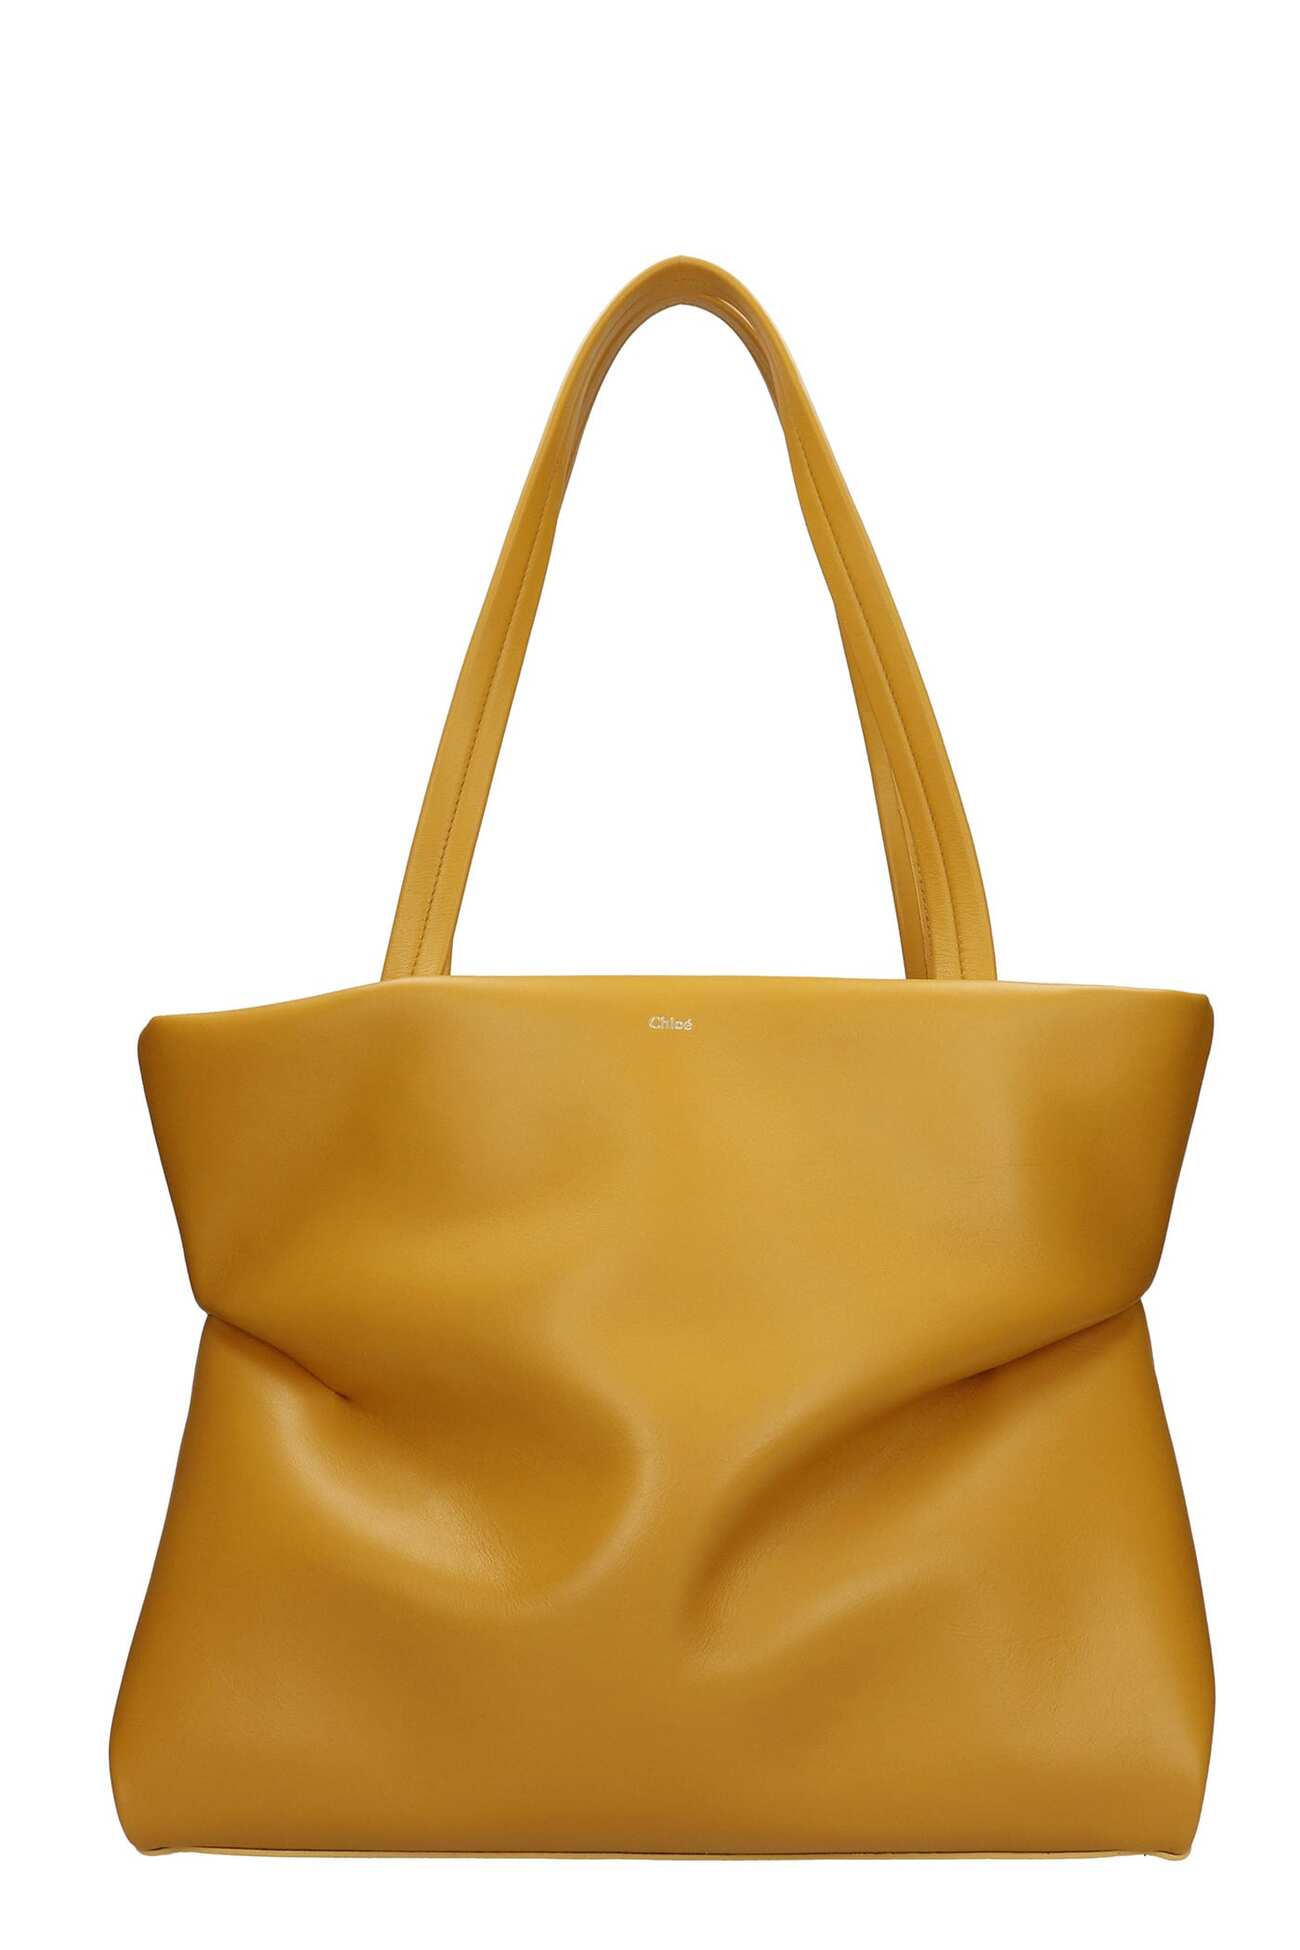 Chloé Chloé Judy Tote In Yellow Leather